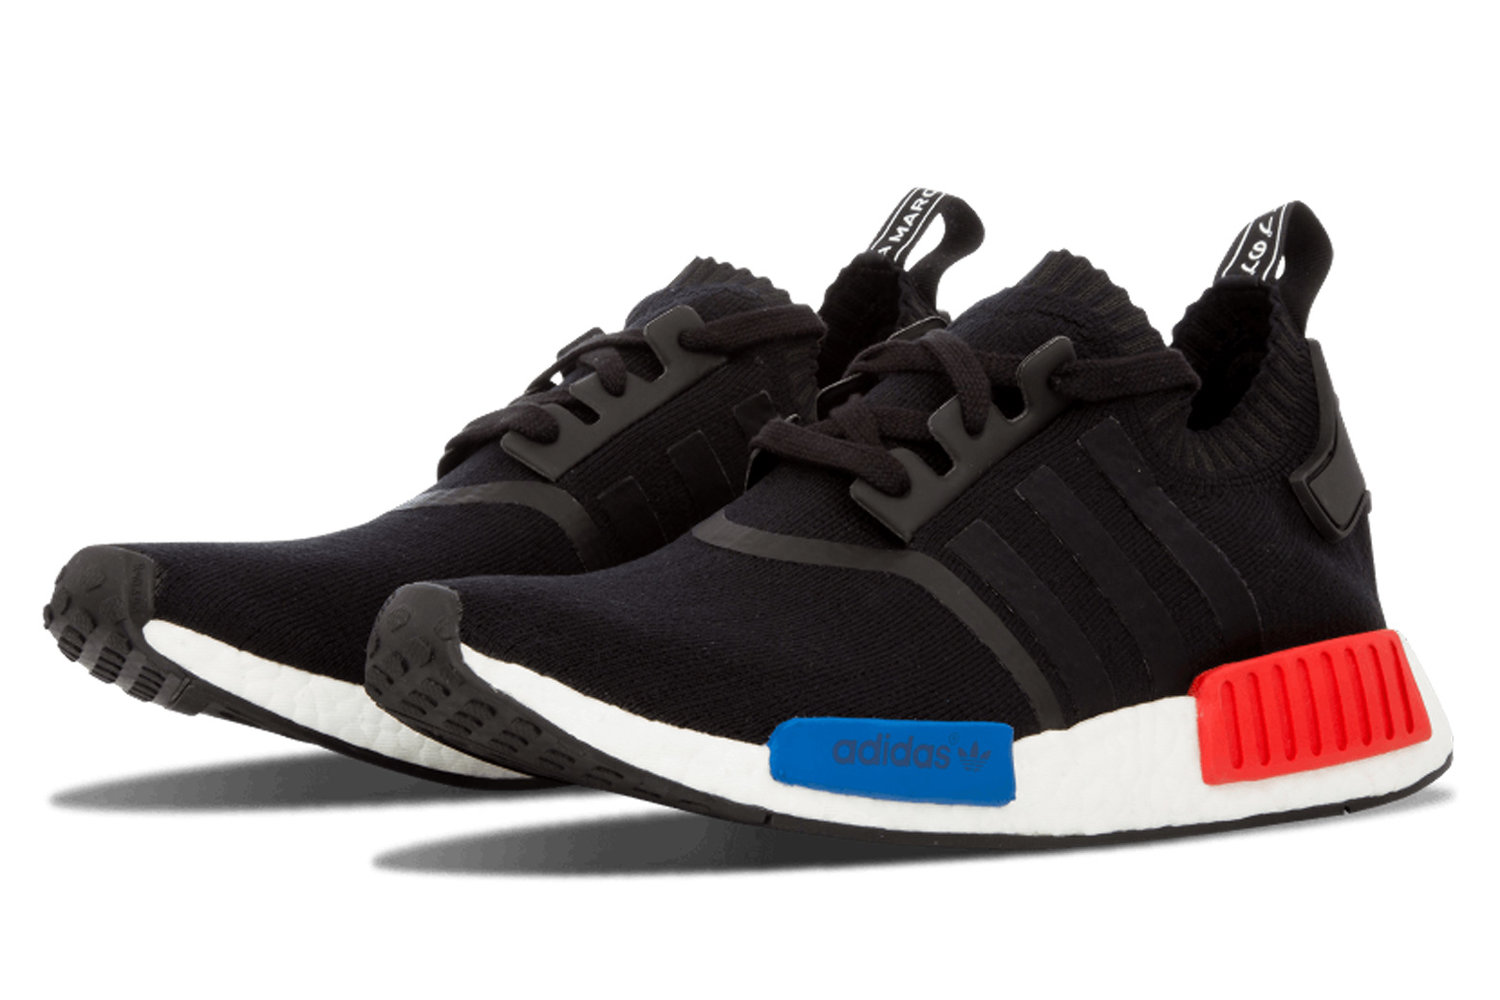 Lejos Microprocesador País NMD R1 O.G. Makes a Comeback This Month + Where To Buy — CNK Daily  (ChicksNKicks)